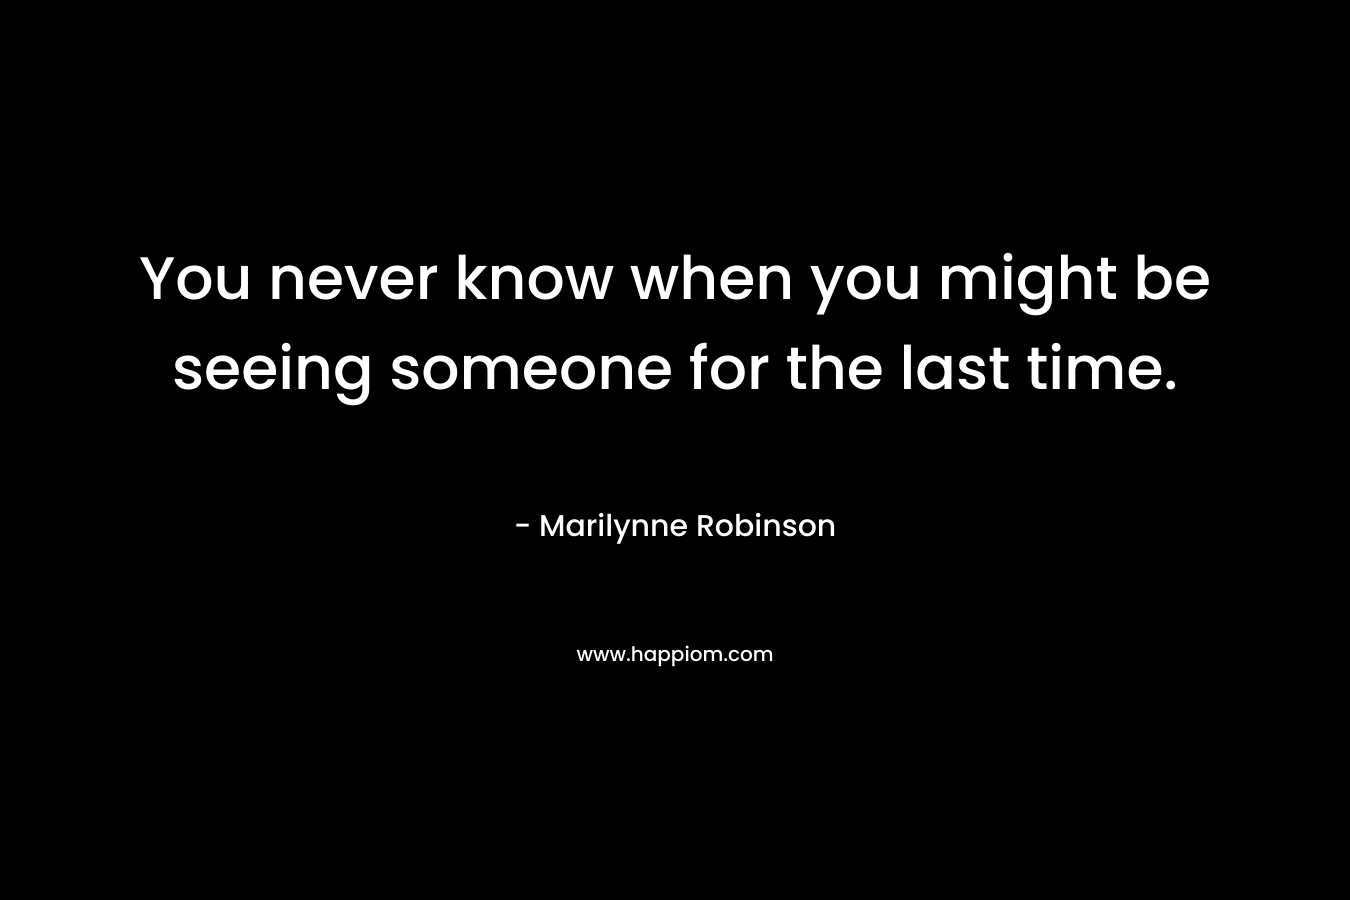 You never know when you might be seeing someone for the last time. – Marilynne Robinson